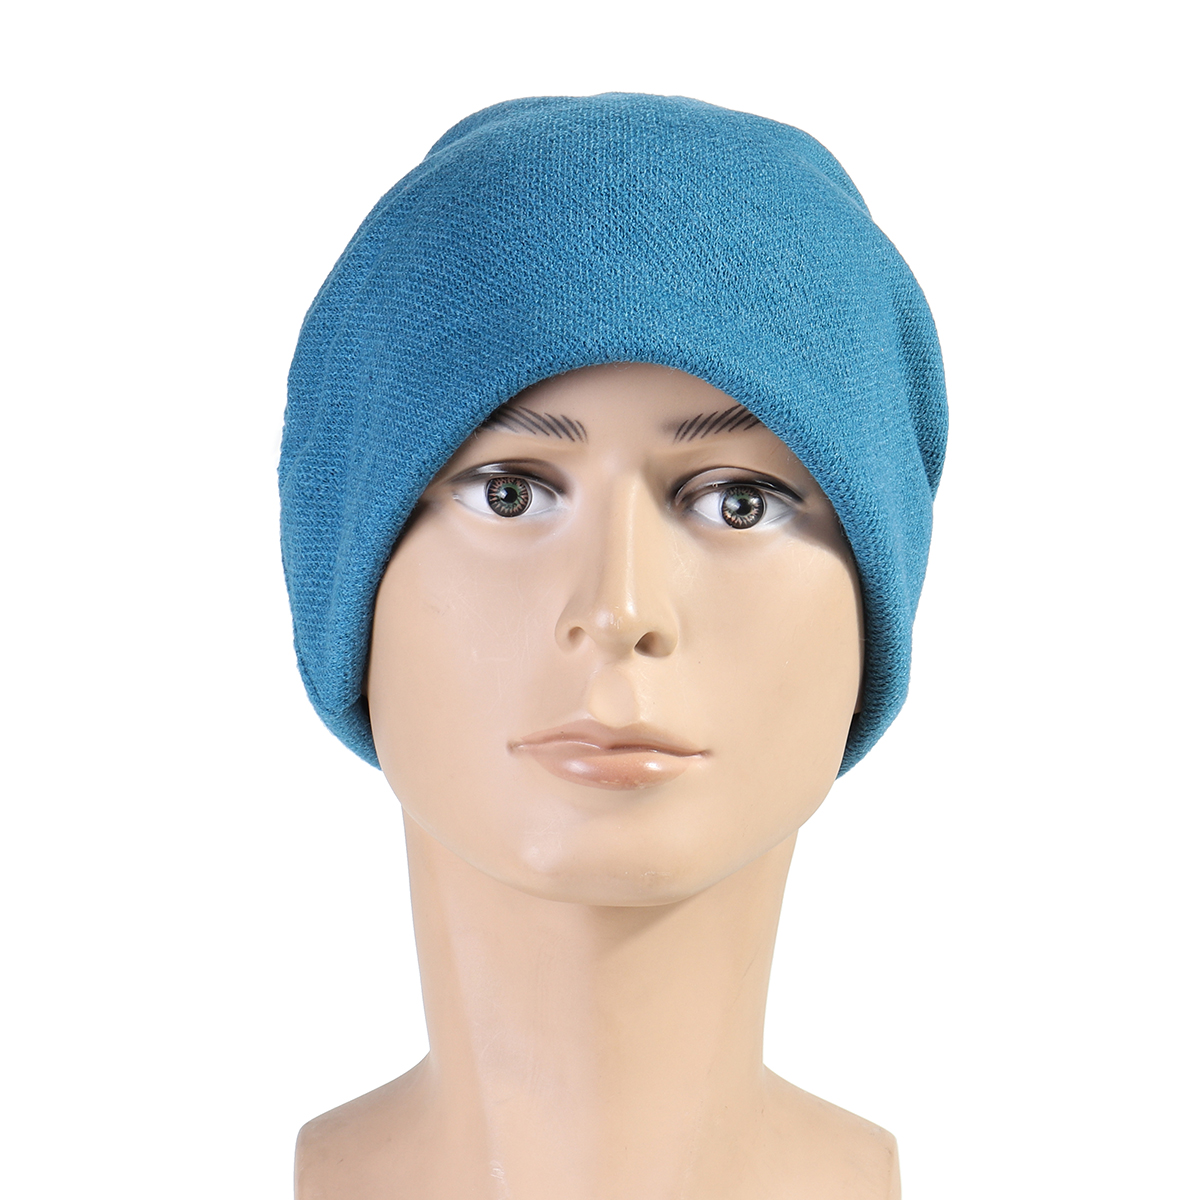 Knitted-Hat-Cotton-Winter-Ski-Running-Hunting-Cycling-Warm-Cap-1628524-6